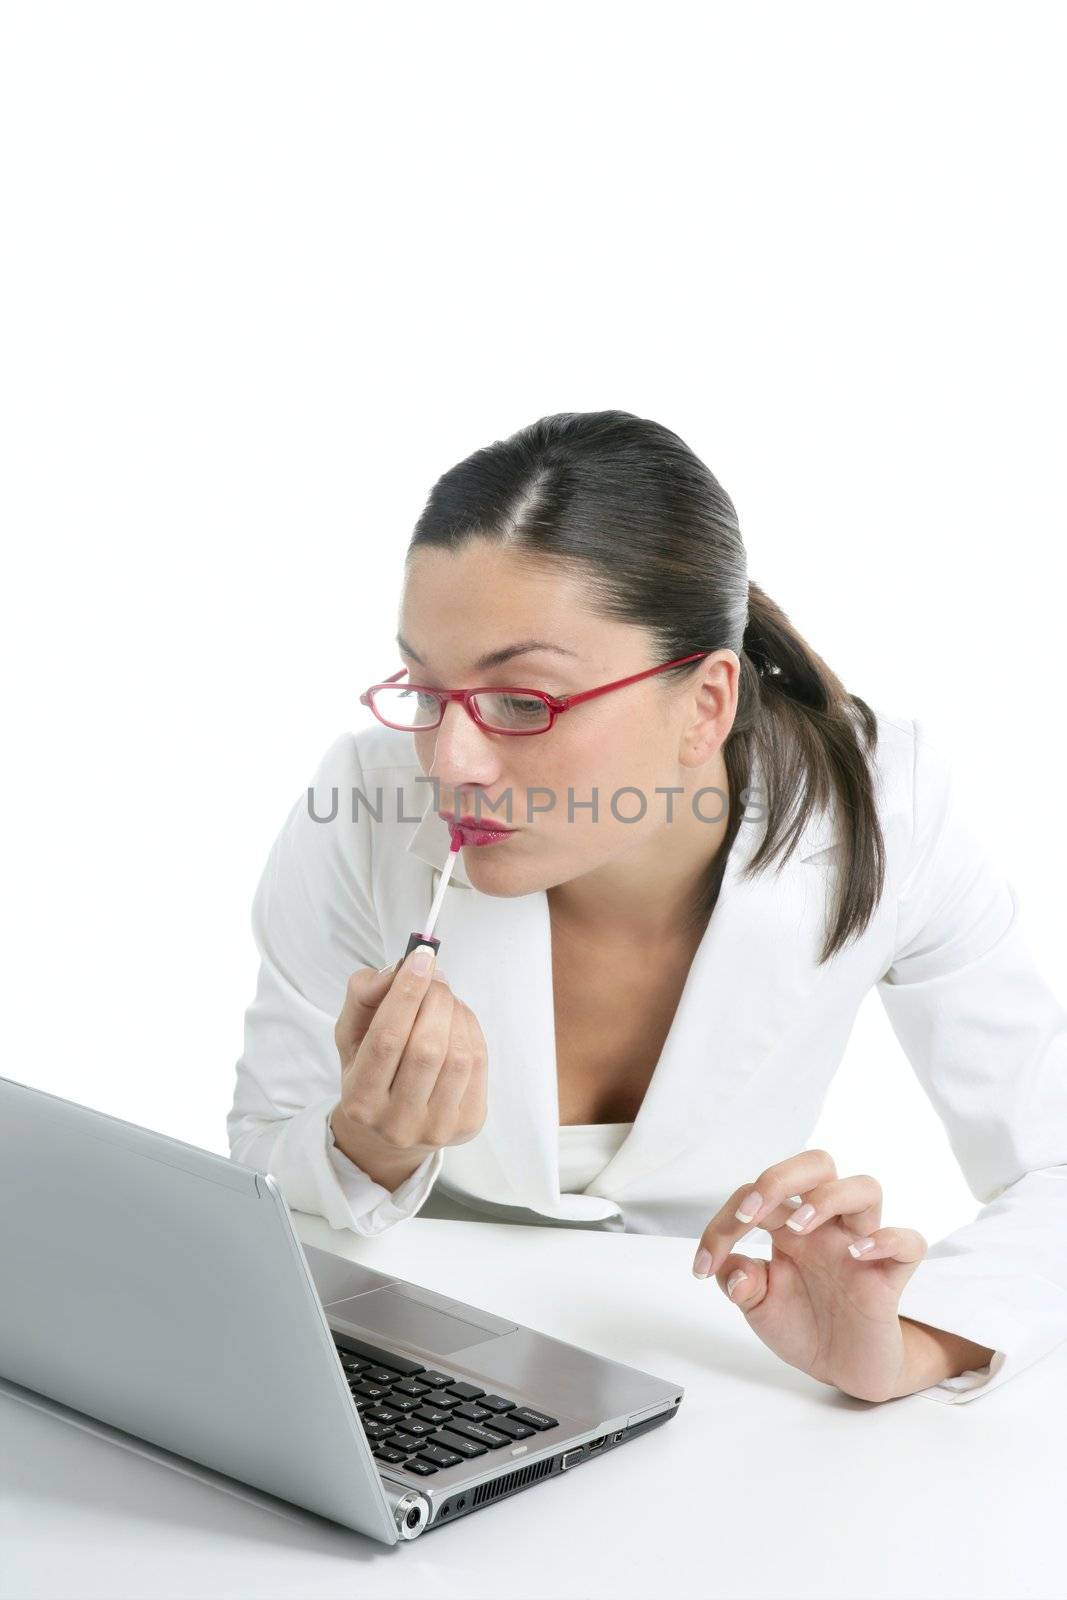 Business woman with red lipstick using laptop screen as a mirror